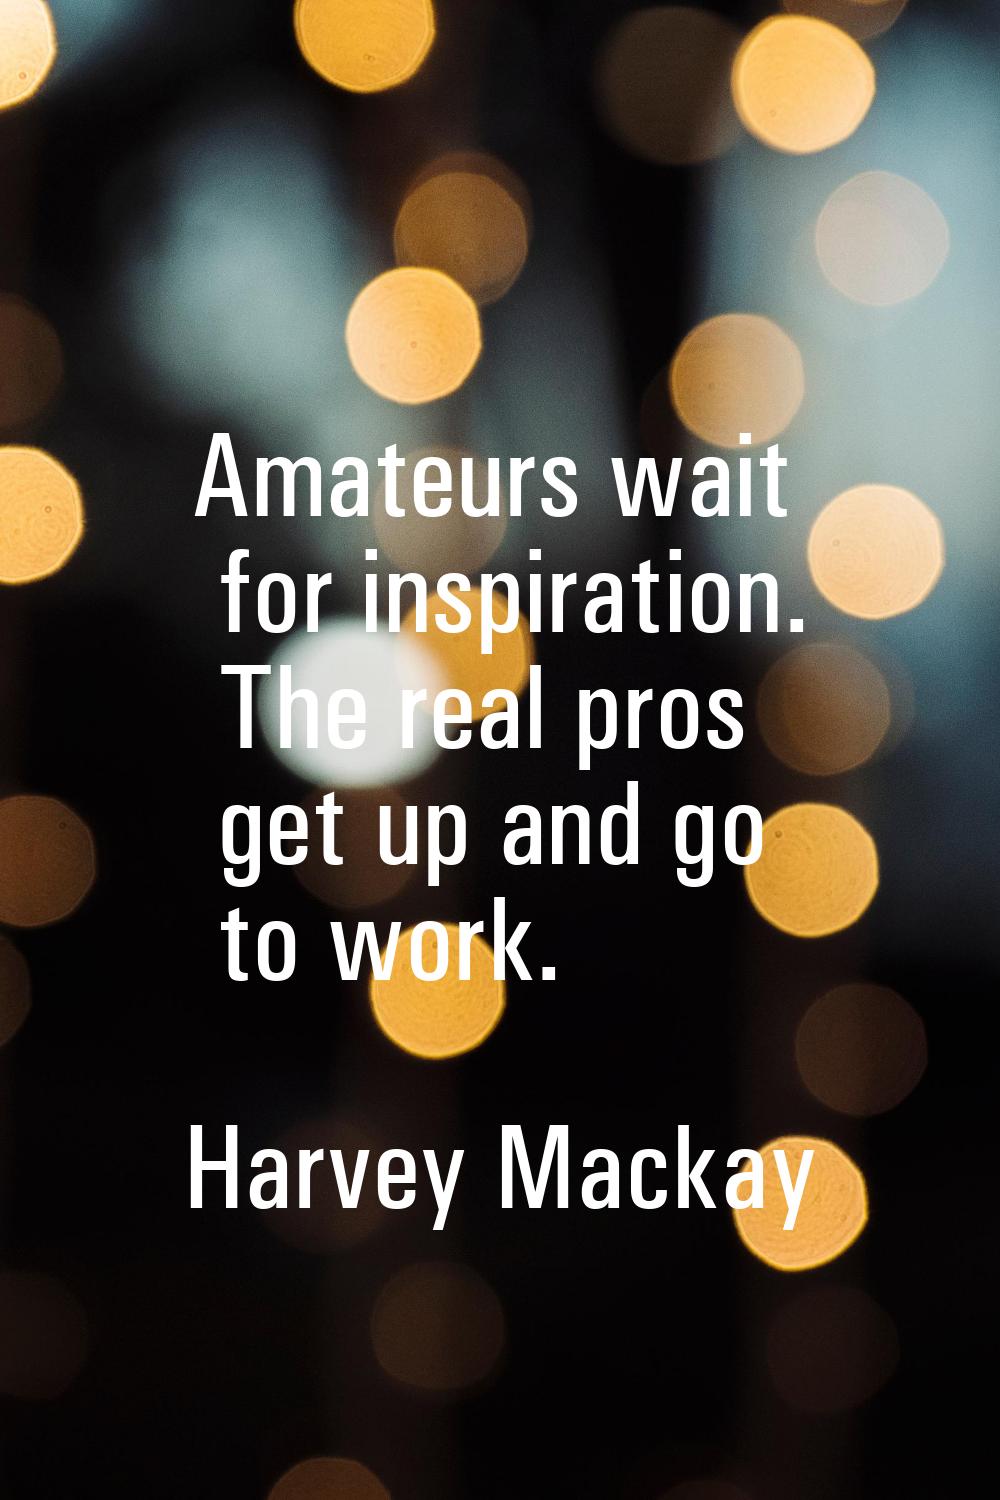 Amateurs wait for inspiration. The real pros get up and go to work.